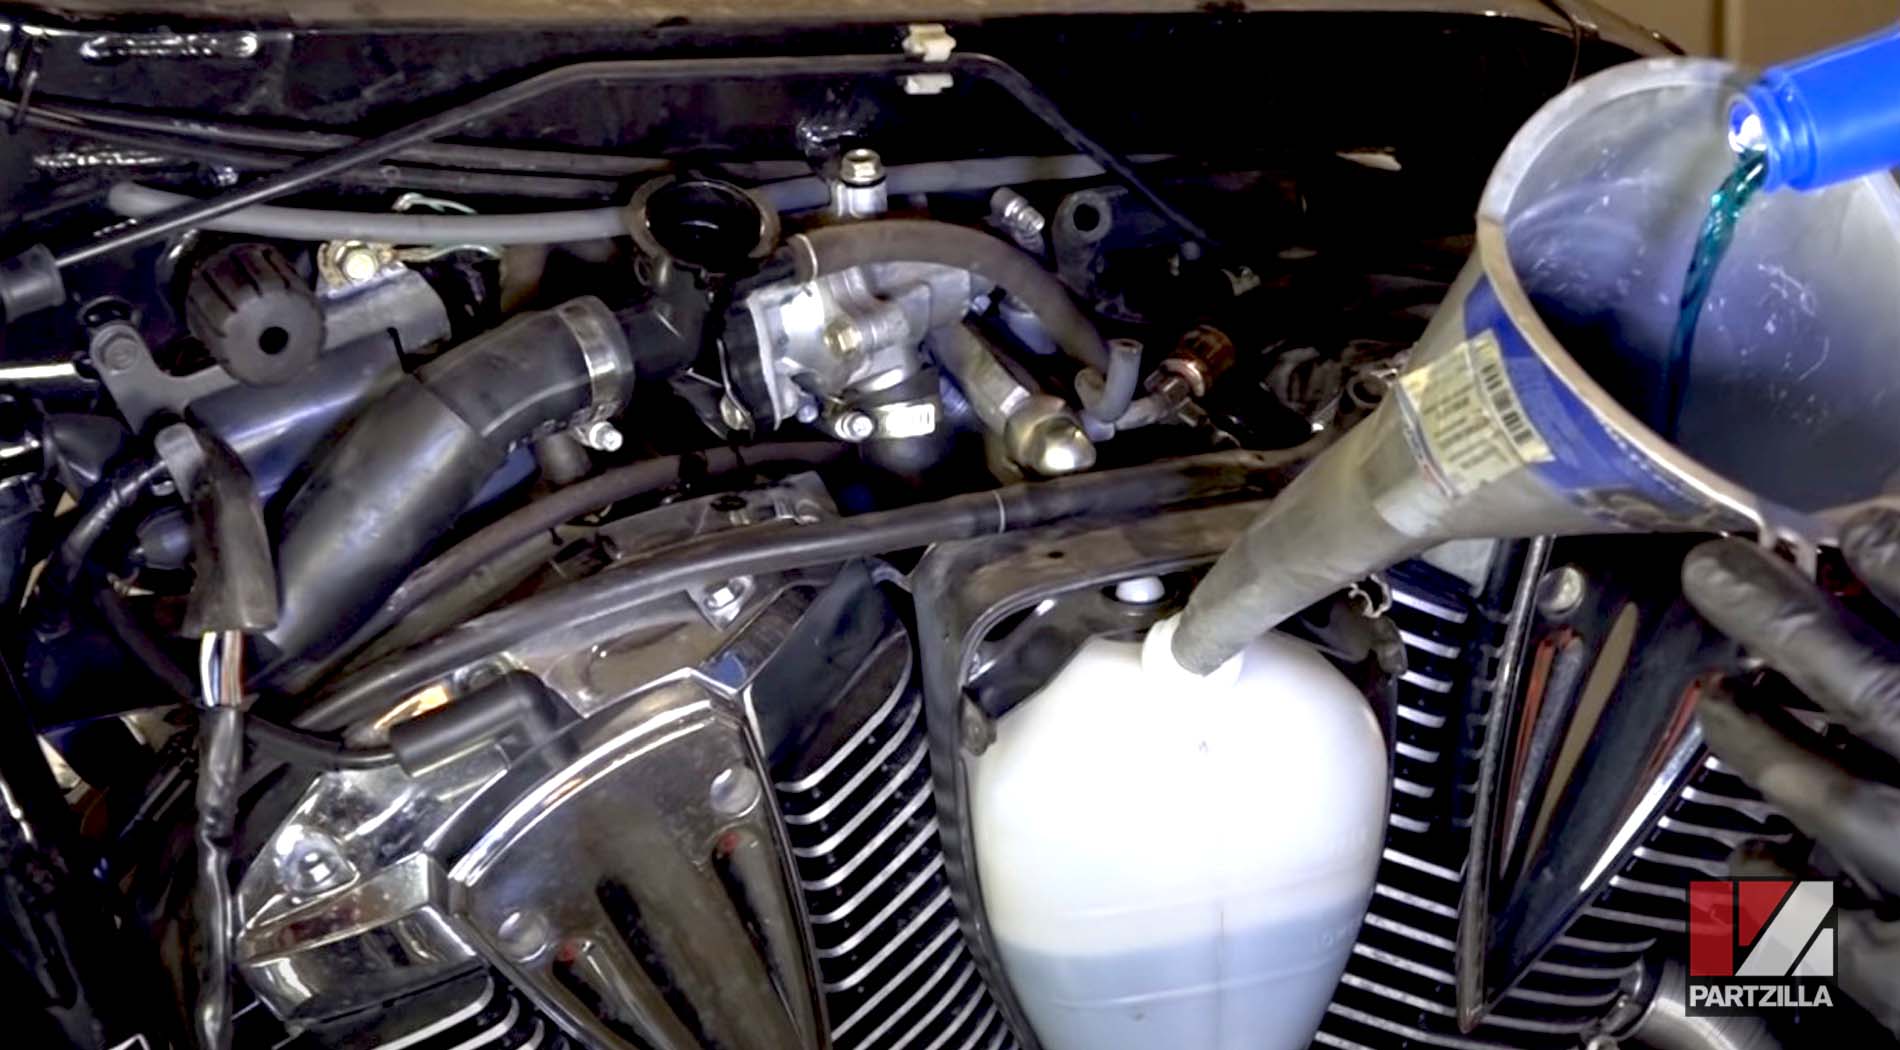 How to change motorcycle coolant